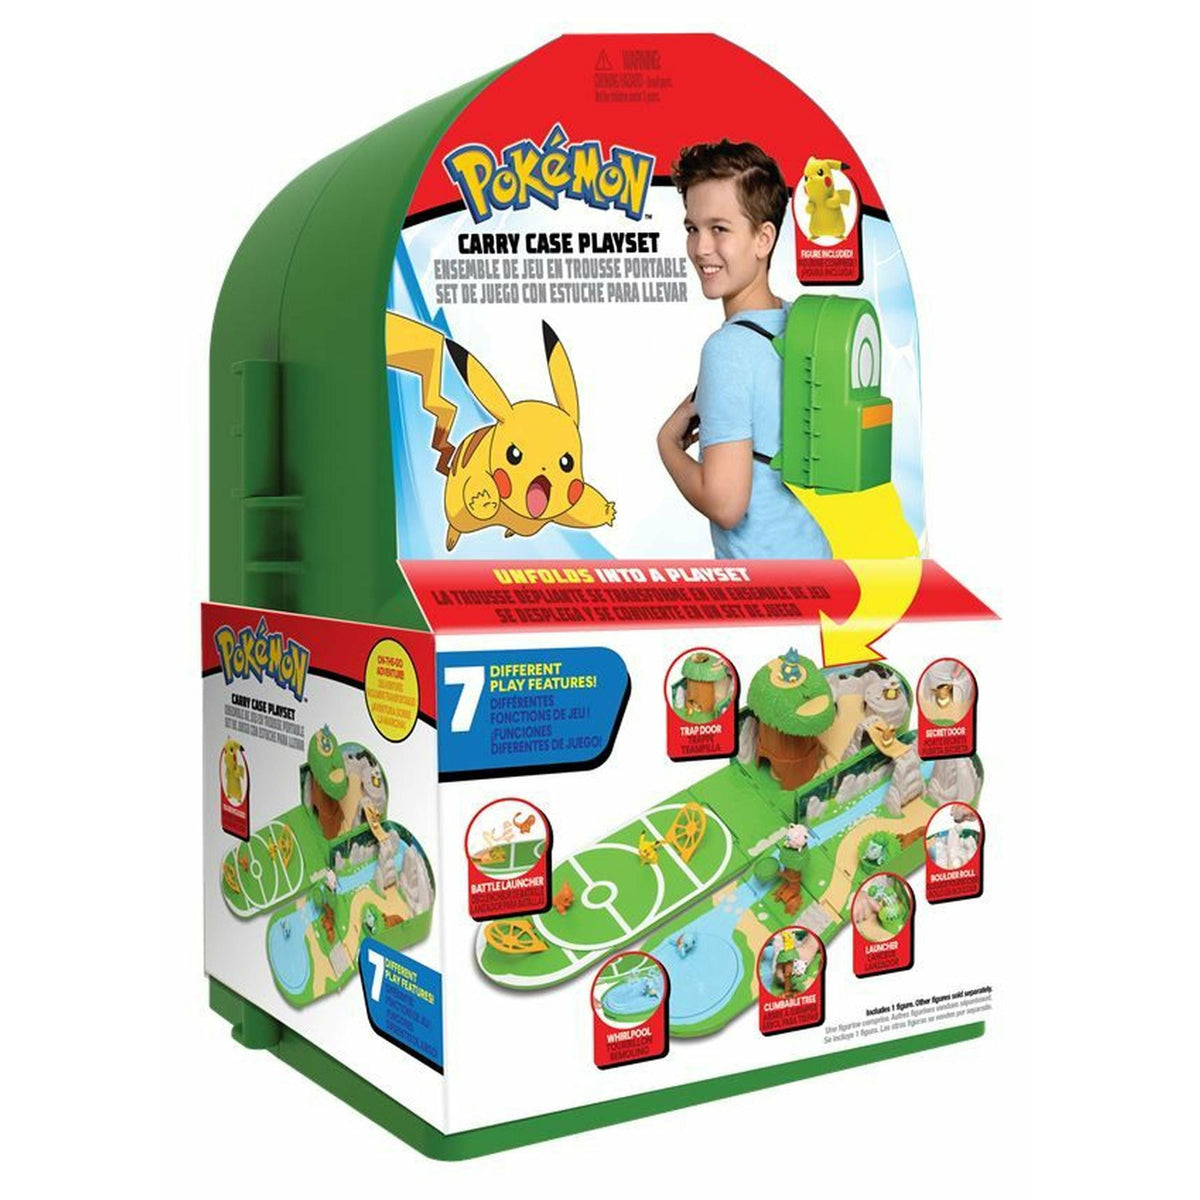 Pokemon Carry Case Medium Playset Backpack Style Toy - baby & kid stuff -  by owner - household sale - craigslist